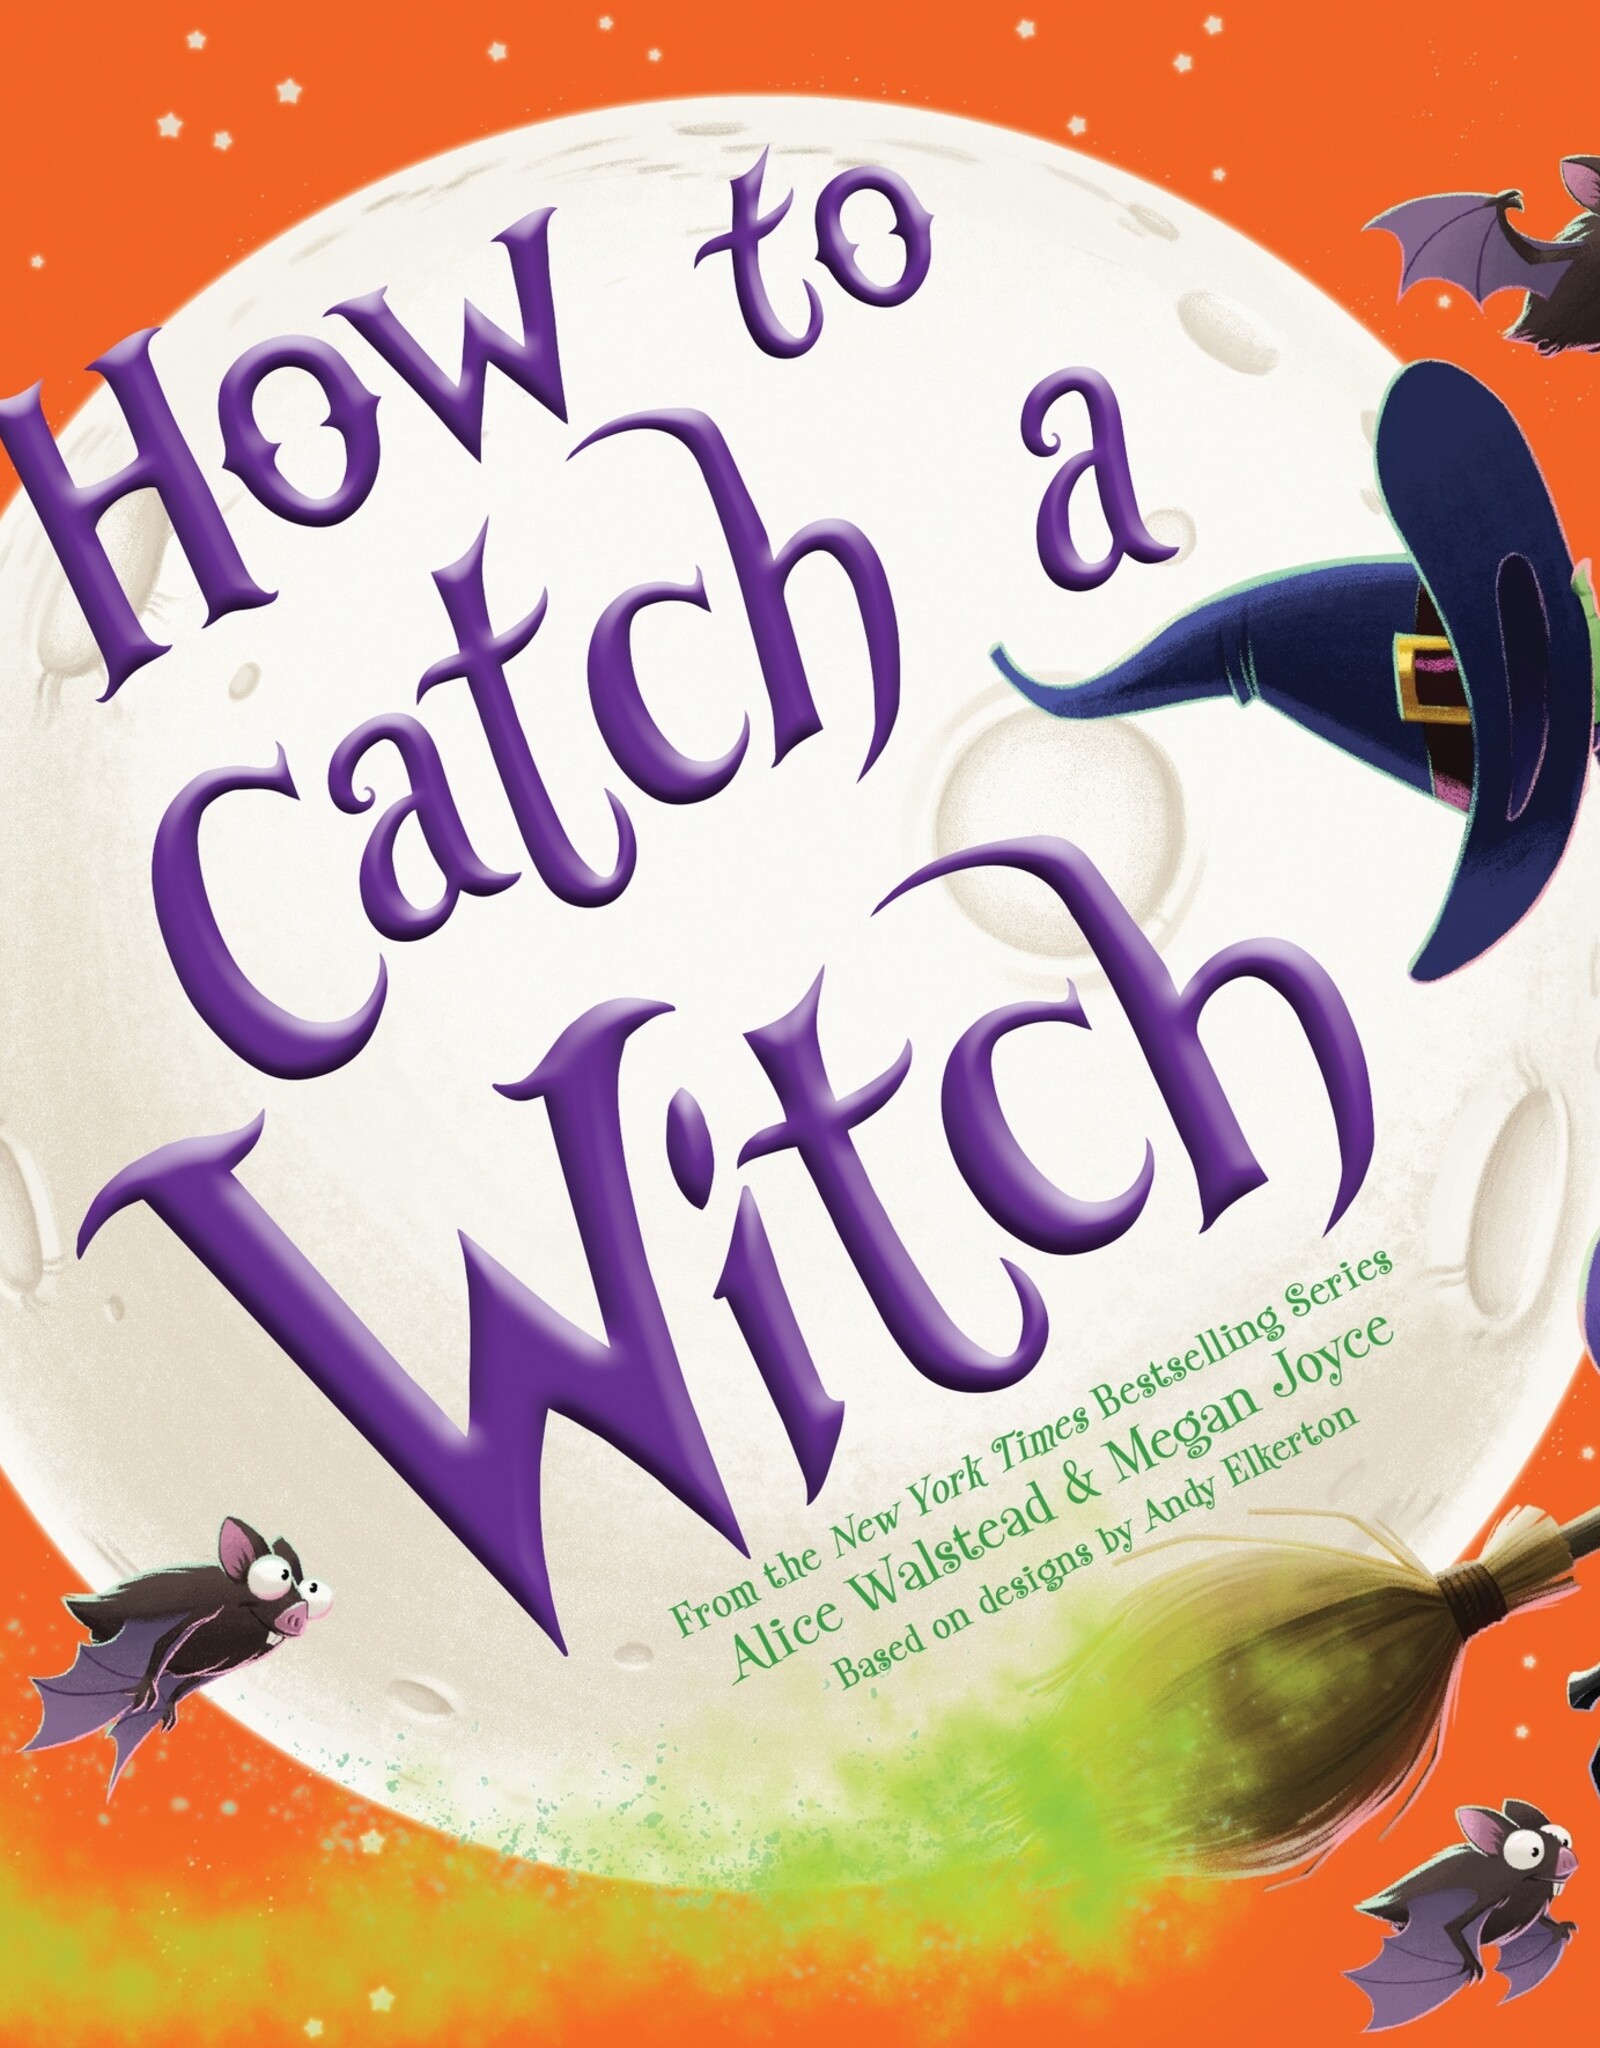 Sourcebooks How to Catch A Witch (hardcover)